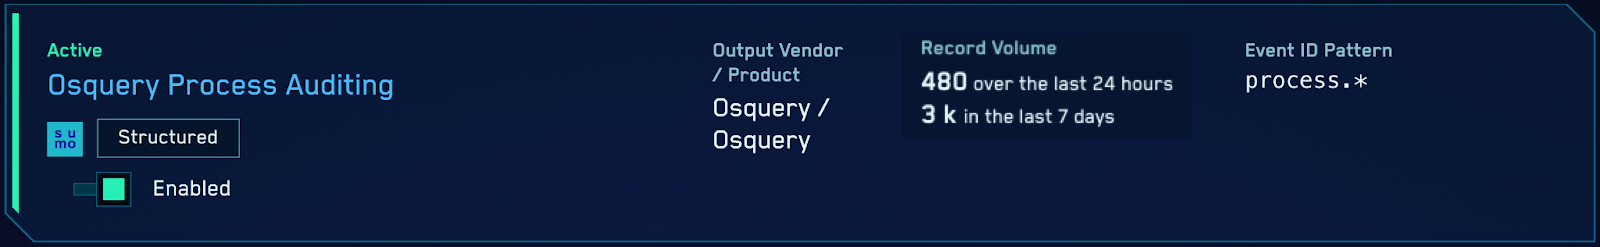 osquery-record-volume.png